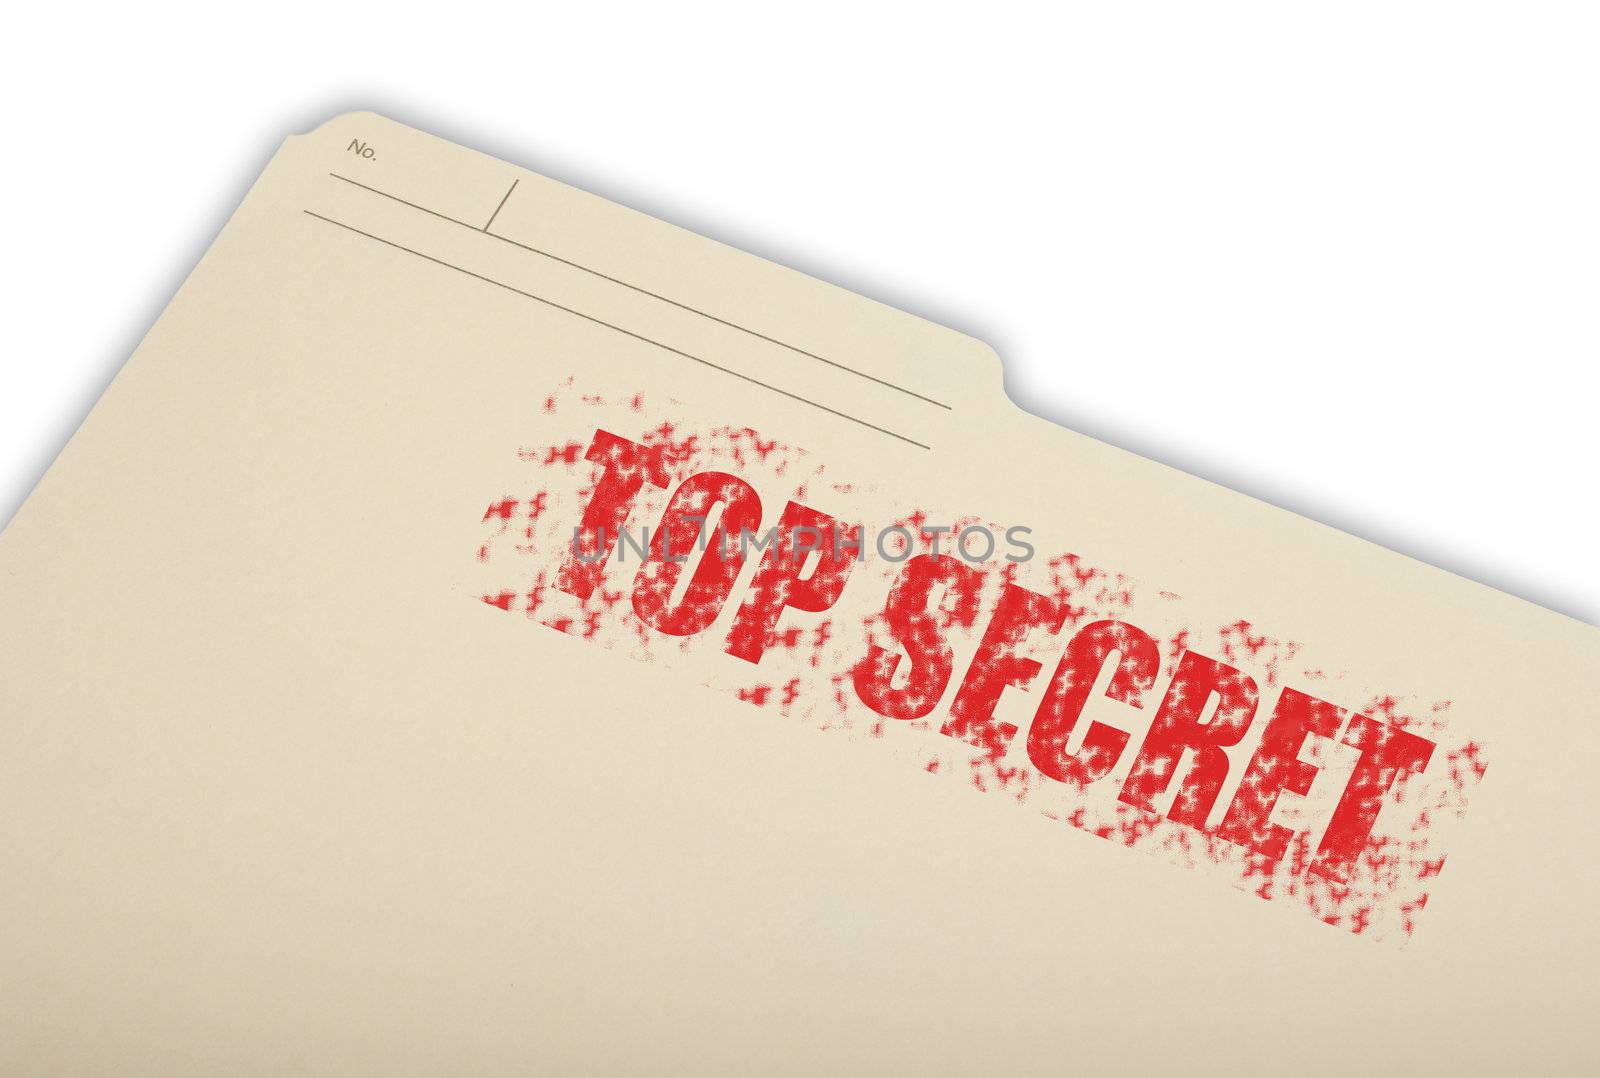 Top Secret Information by AlphaBaby